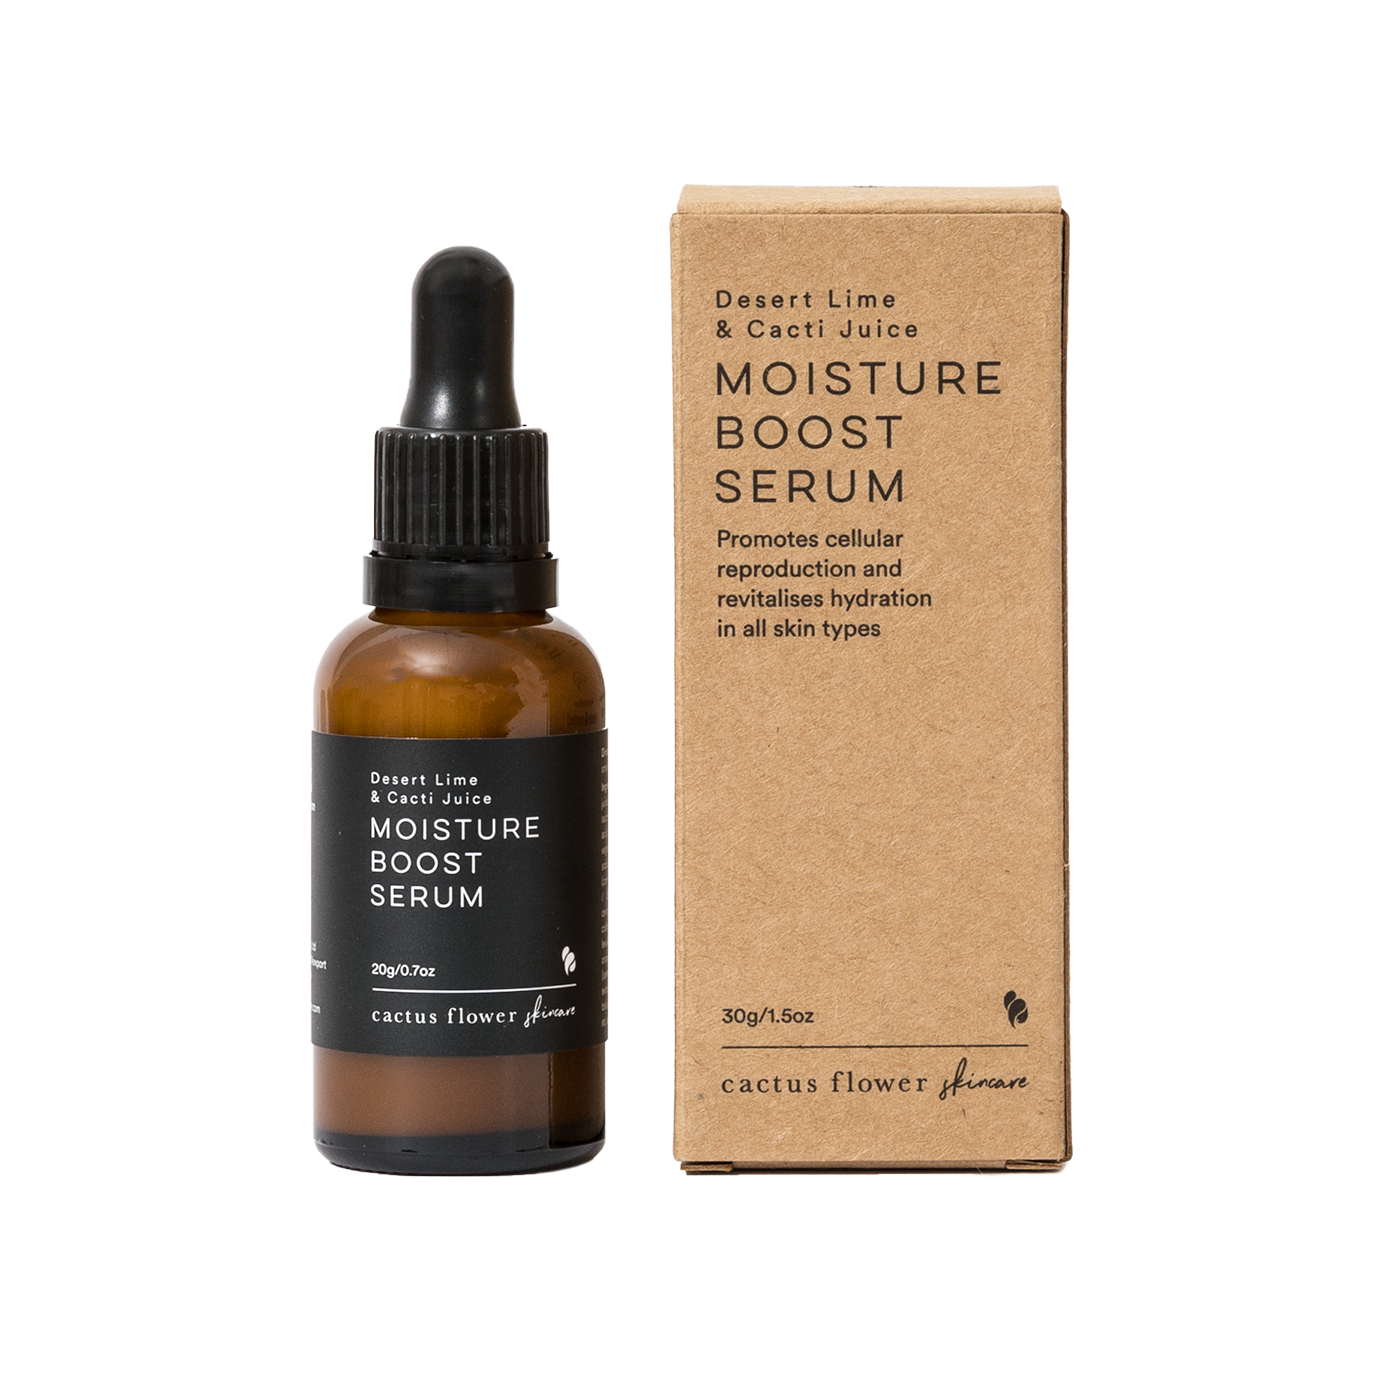 Moisture Boost Serum with Product Box